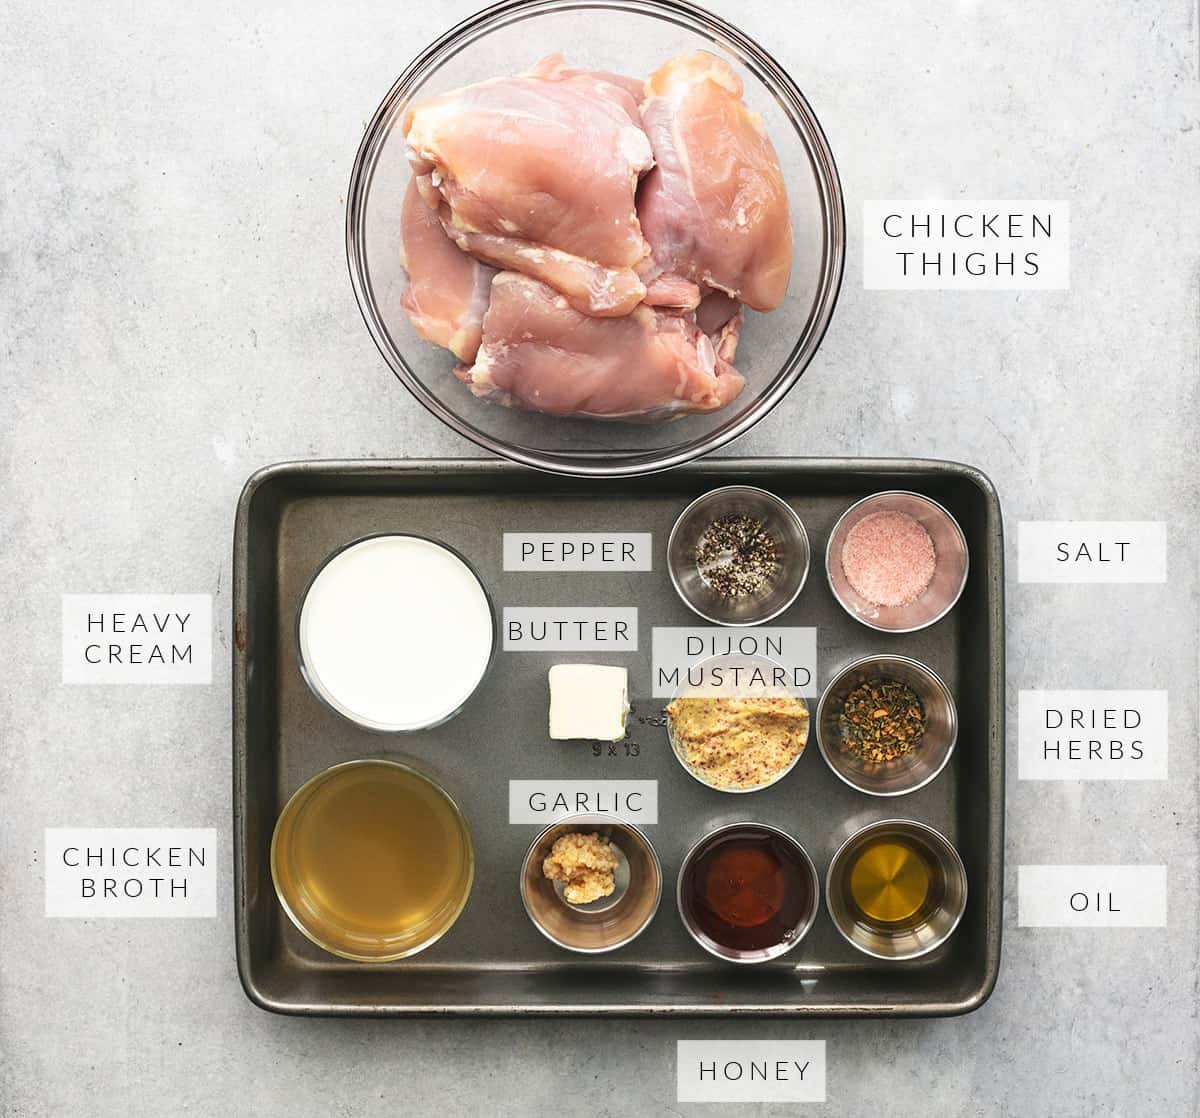 ingredients for baked chicken thighs recipe